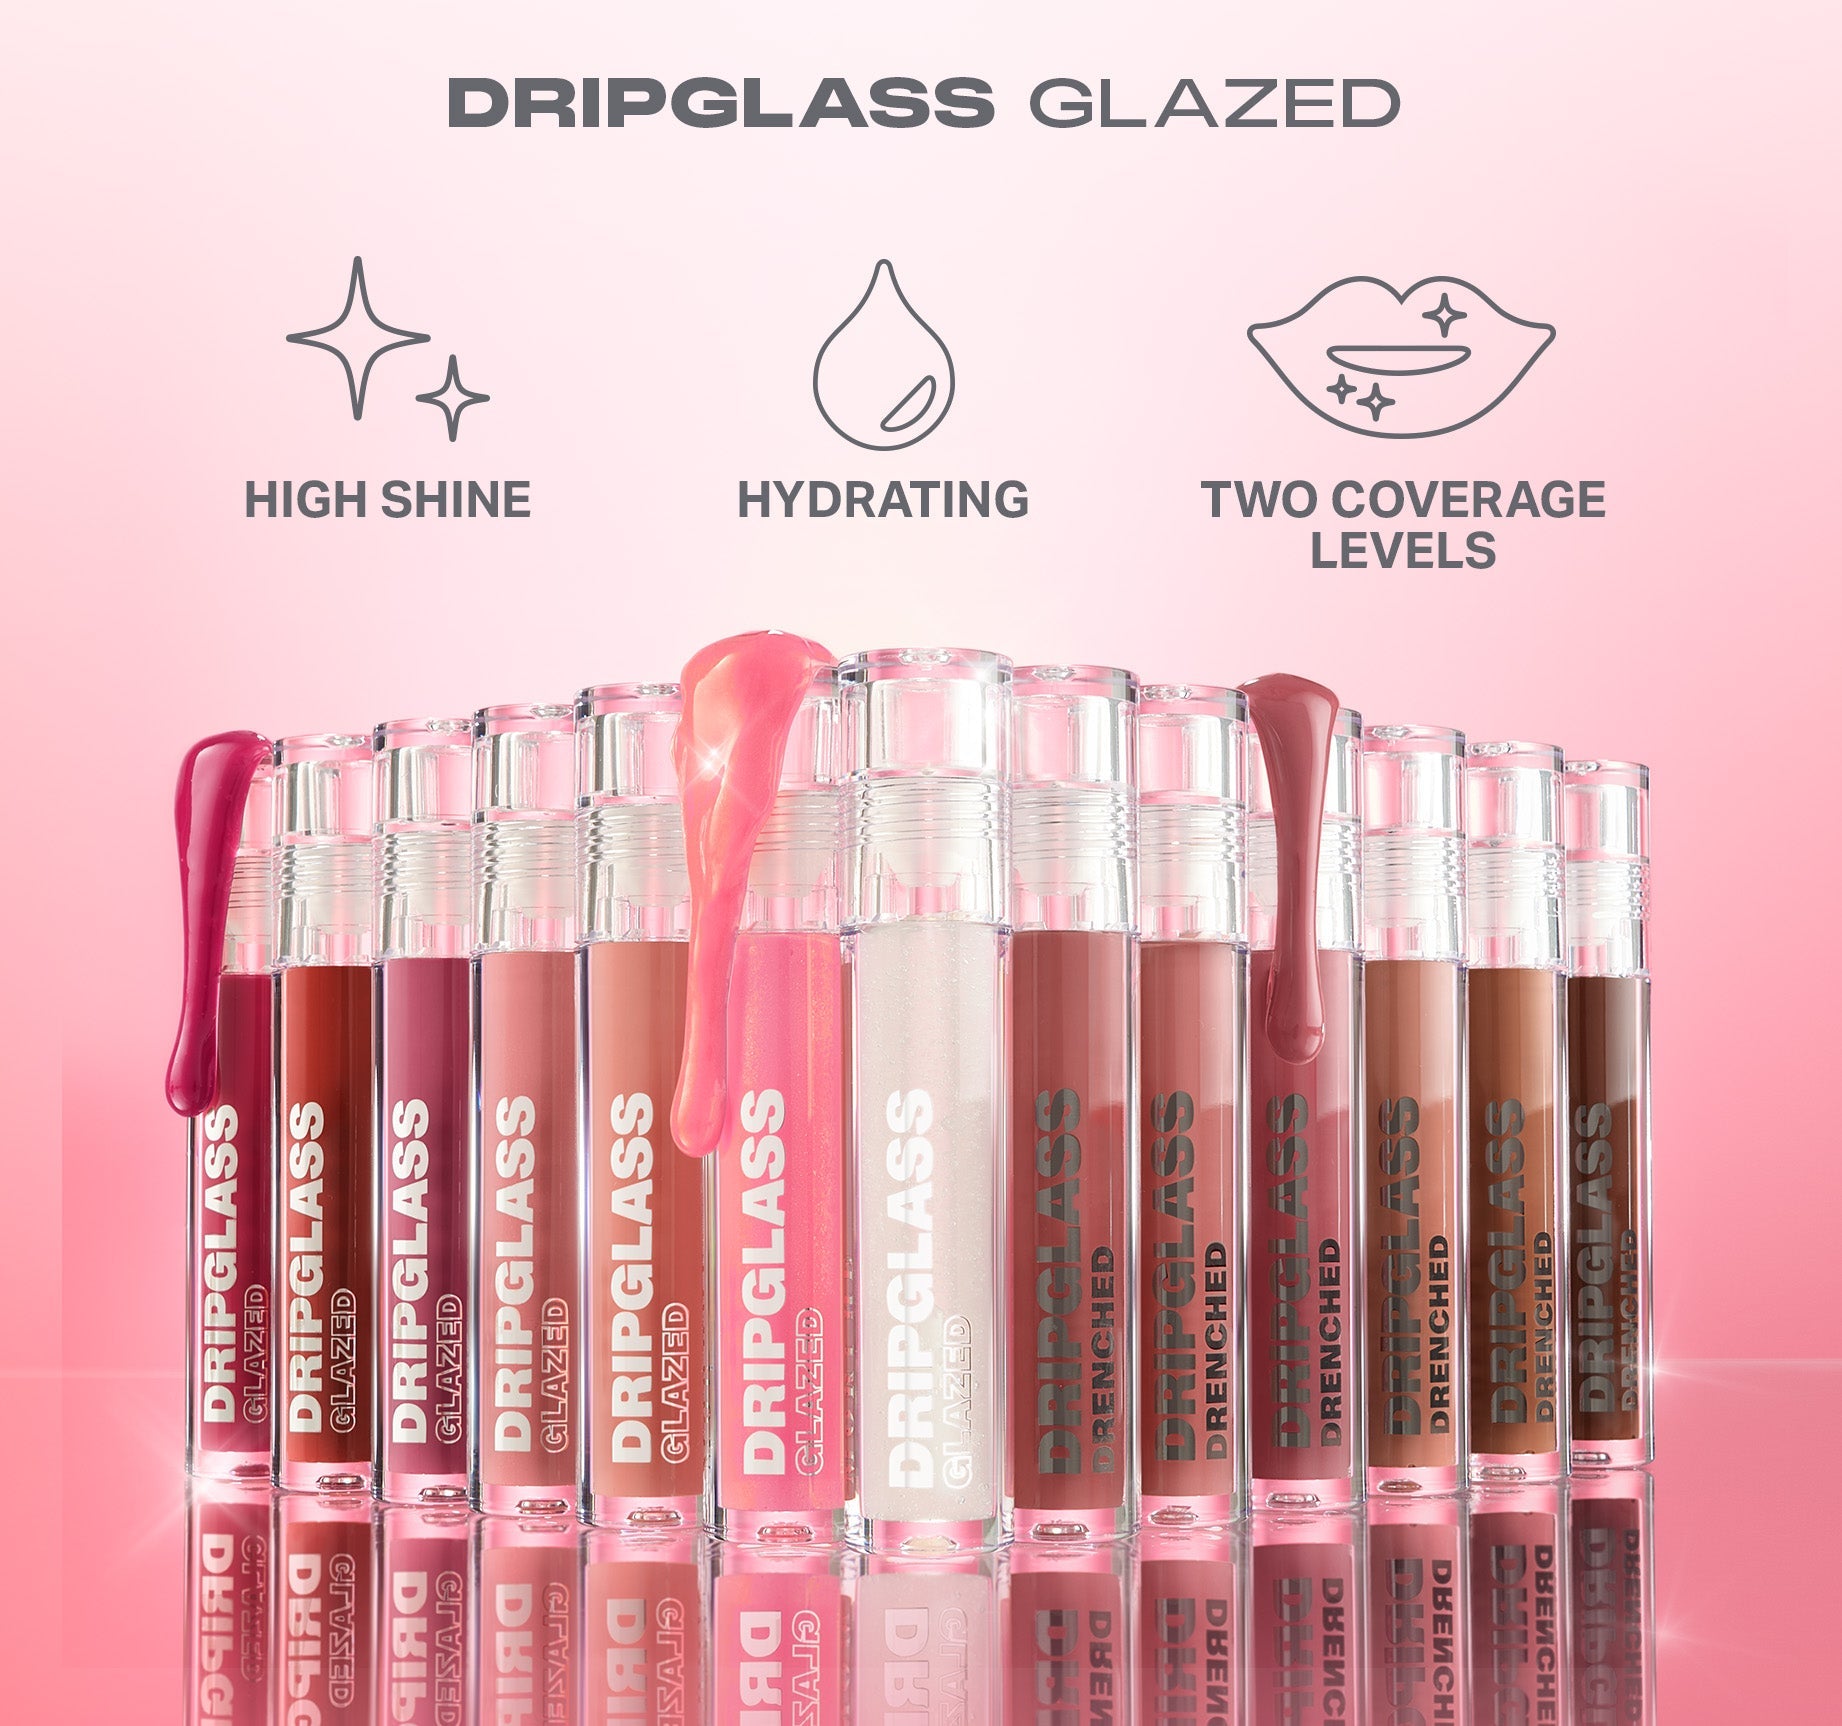 Dripglass Glazed High Shine Lip Gloss - Opalescent Orchid - Image 6